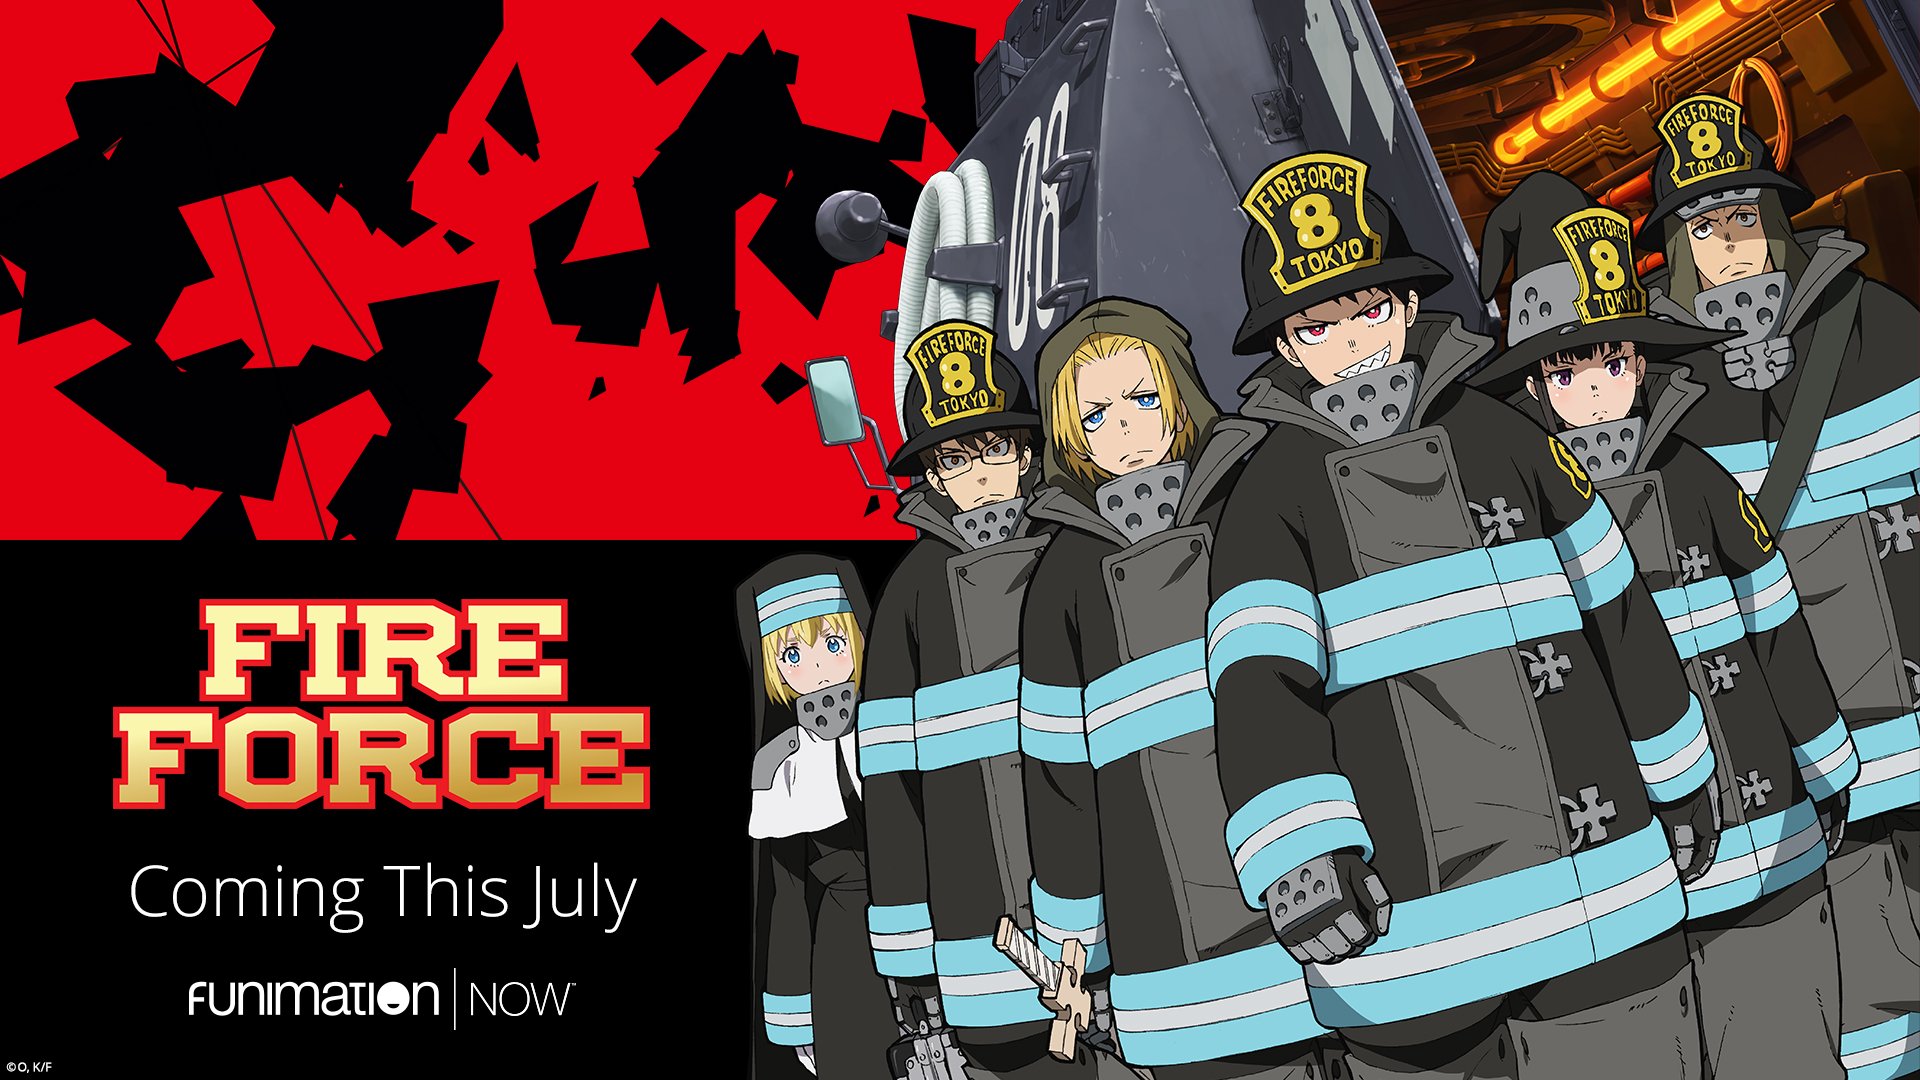 Funimation Presents Fire Force World Premiere with Creator Atsushi Ohkubo  at AX 2019! - Anime Expo